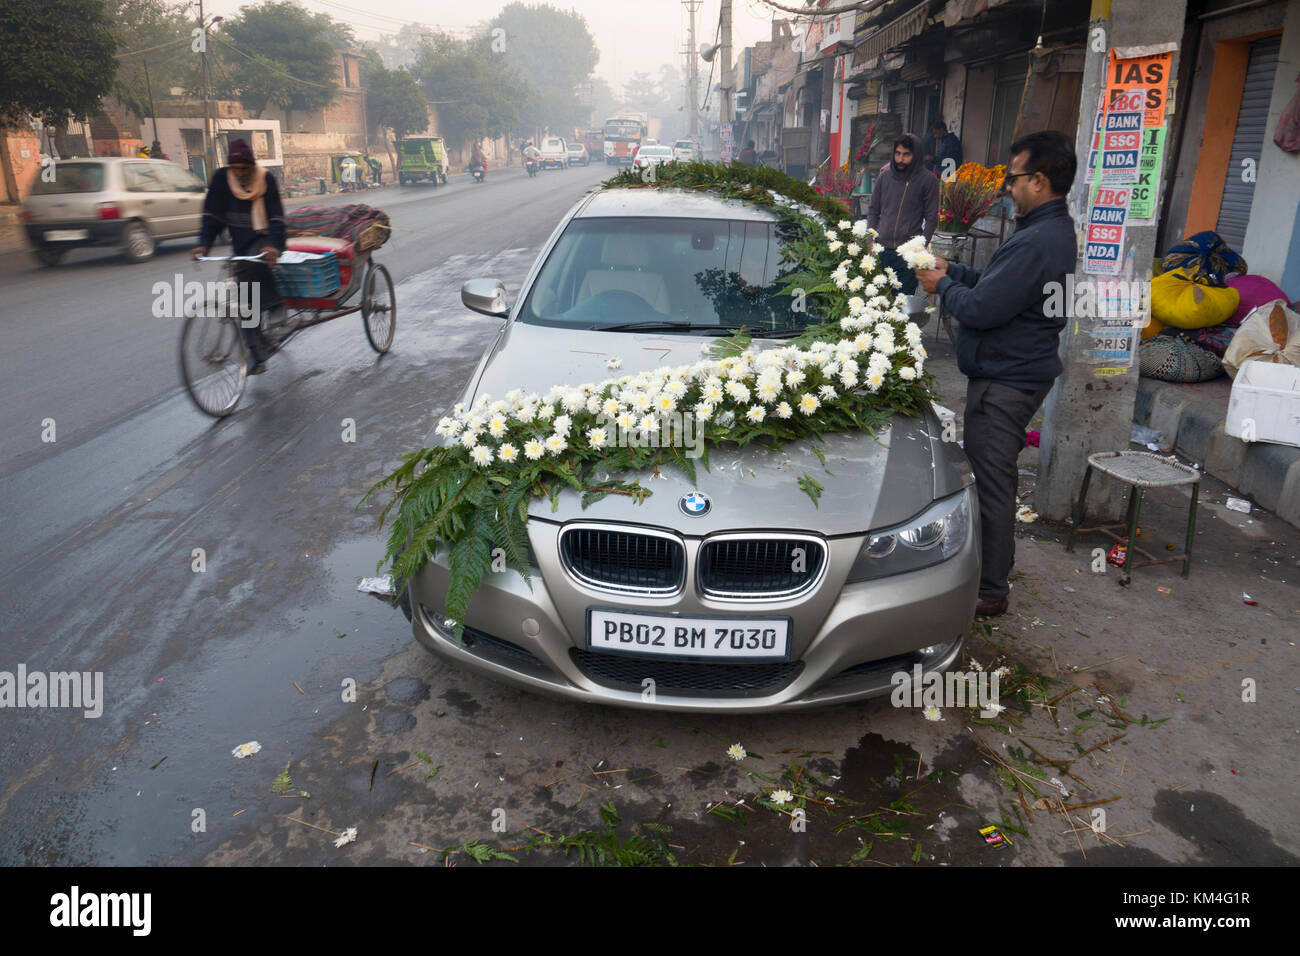 Man decorates wedding car with floral arrangement in Amritsar, India Stock Photo